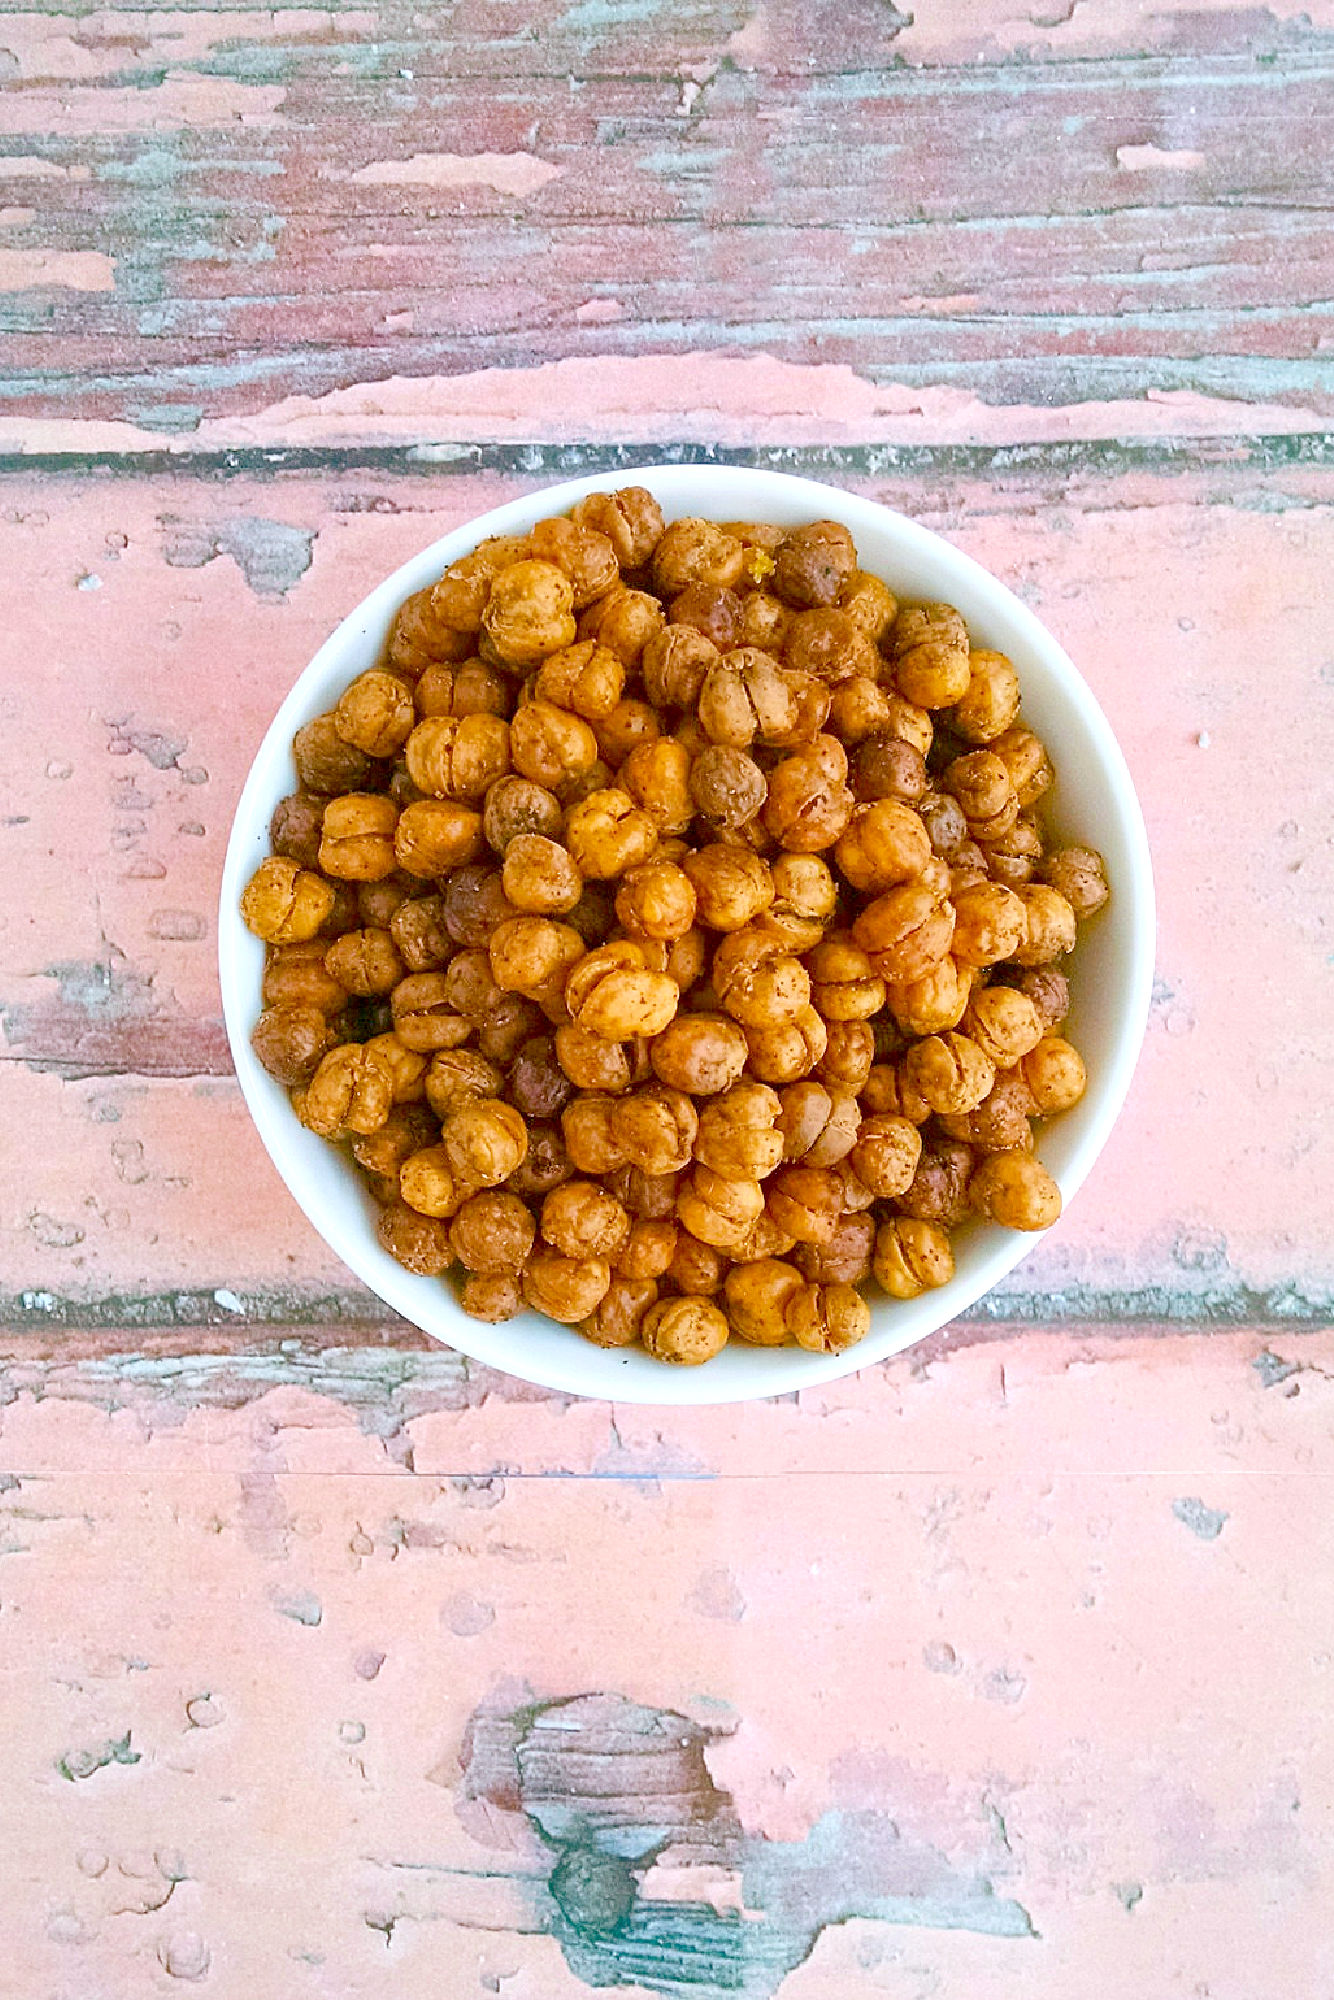 These roasted chickpeas are crunchy, tasty, and healthy! Pizza Roasted Chickpeas are tossed with savory pizza seasoning, Italian seasoning, and some garlic salt to give them that pizza parlor flavor.